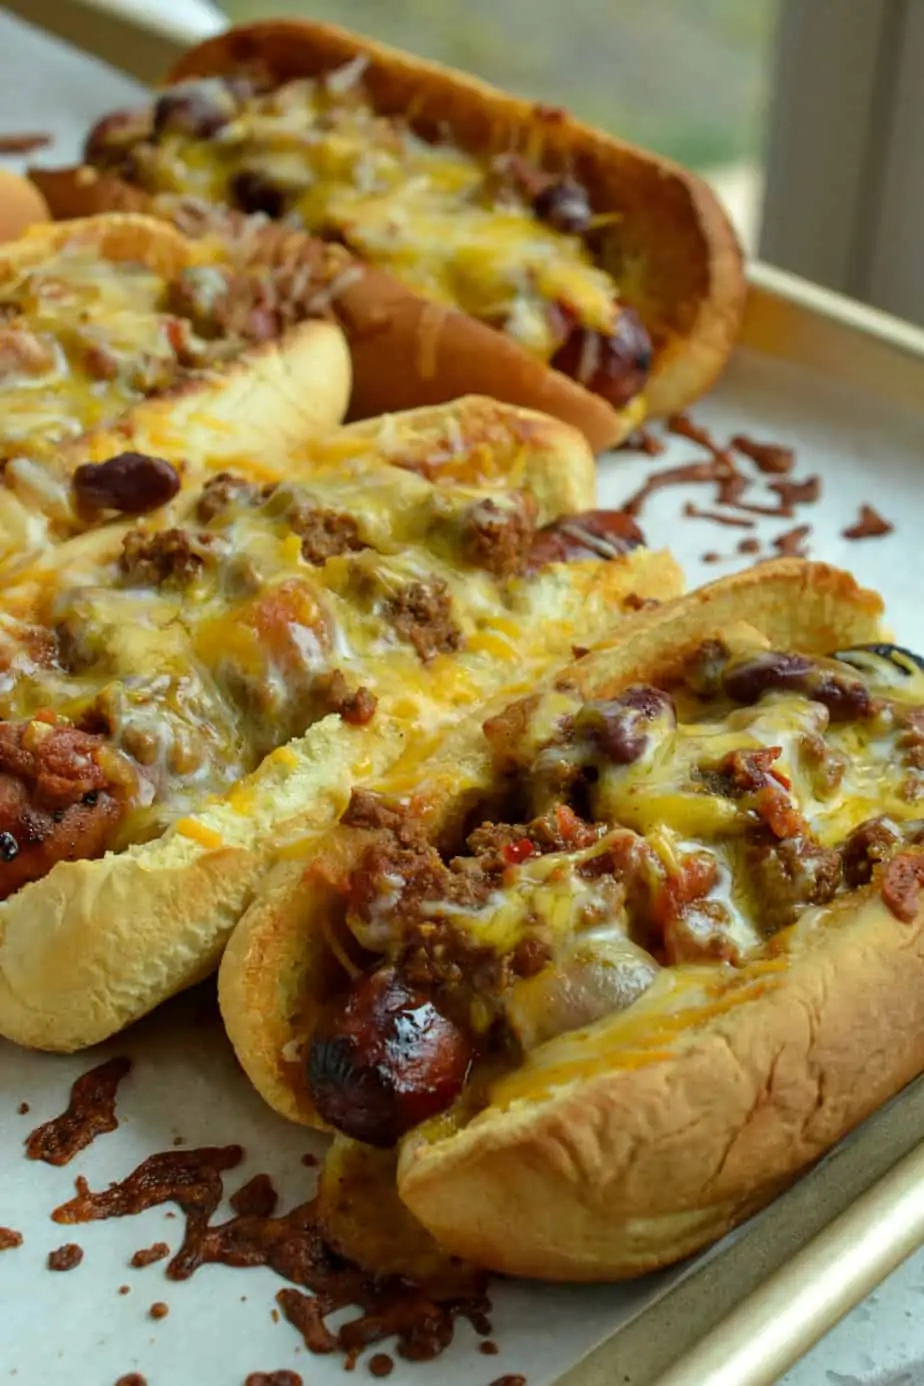 I love to make a big batch of chili and freeze half of it for these Chili Cheese dogs for the following week.